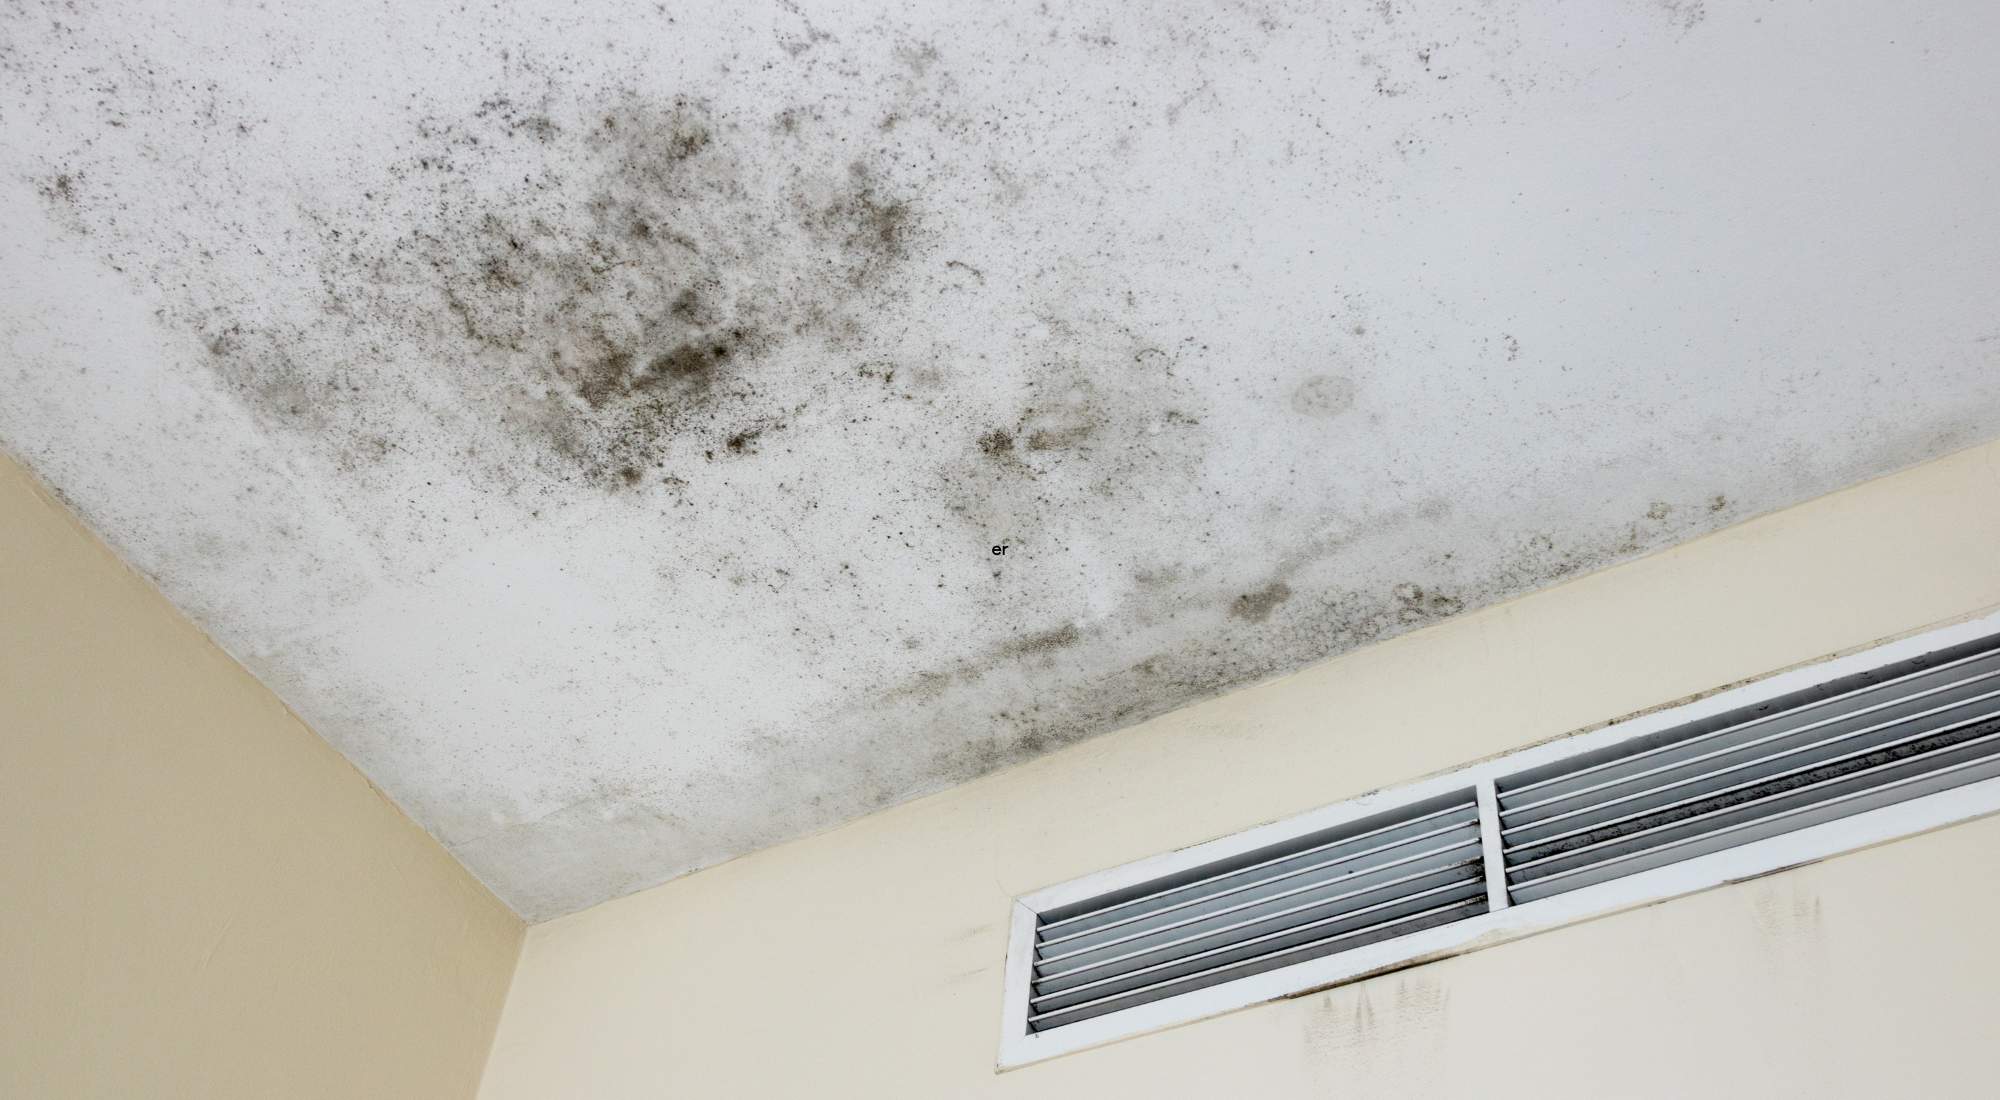 when to walk away from mold in a house